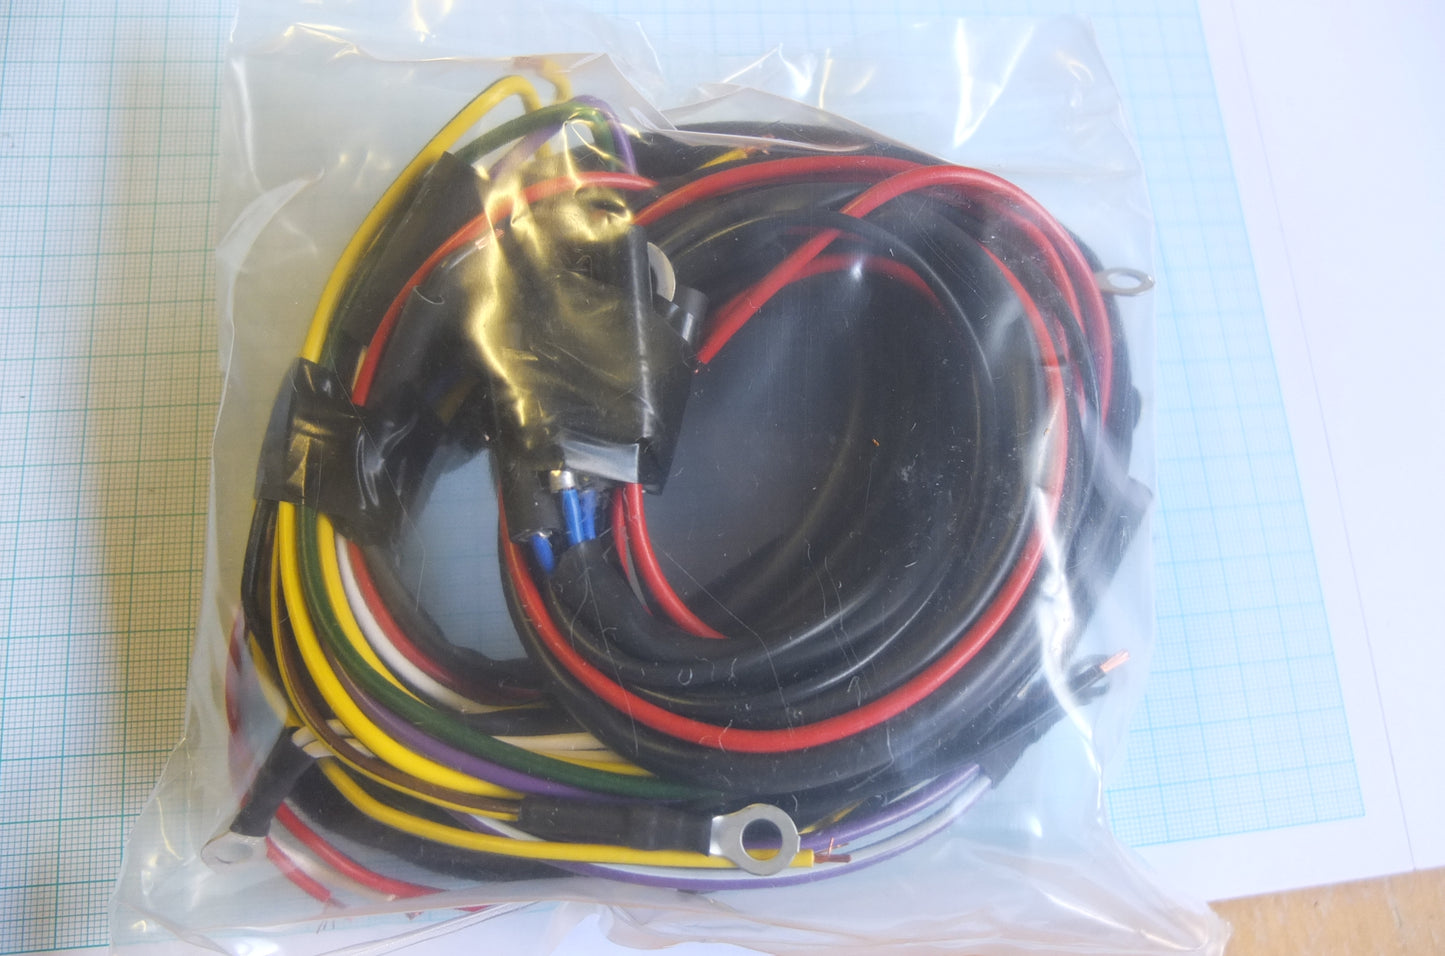 P3/082 Wiring Harness with Tag Ends